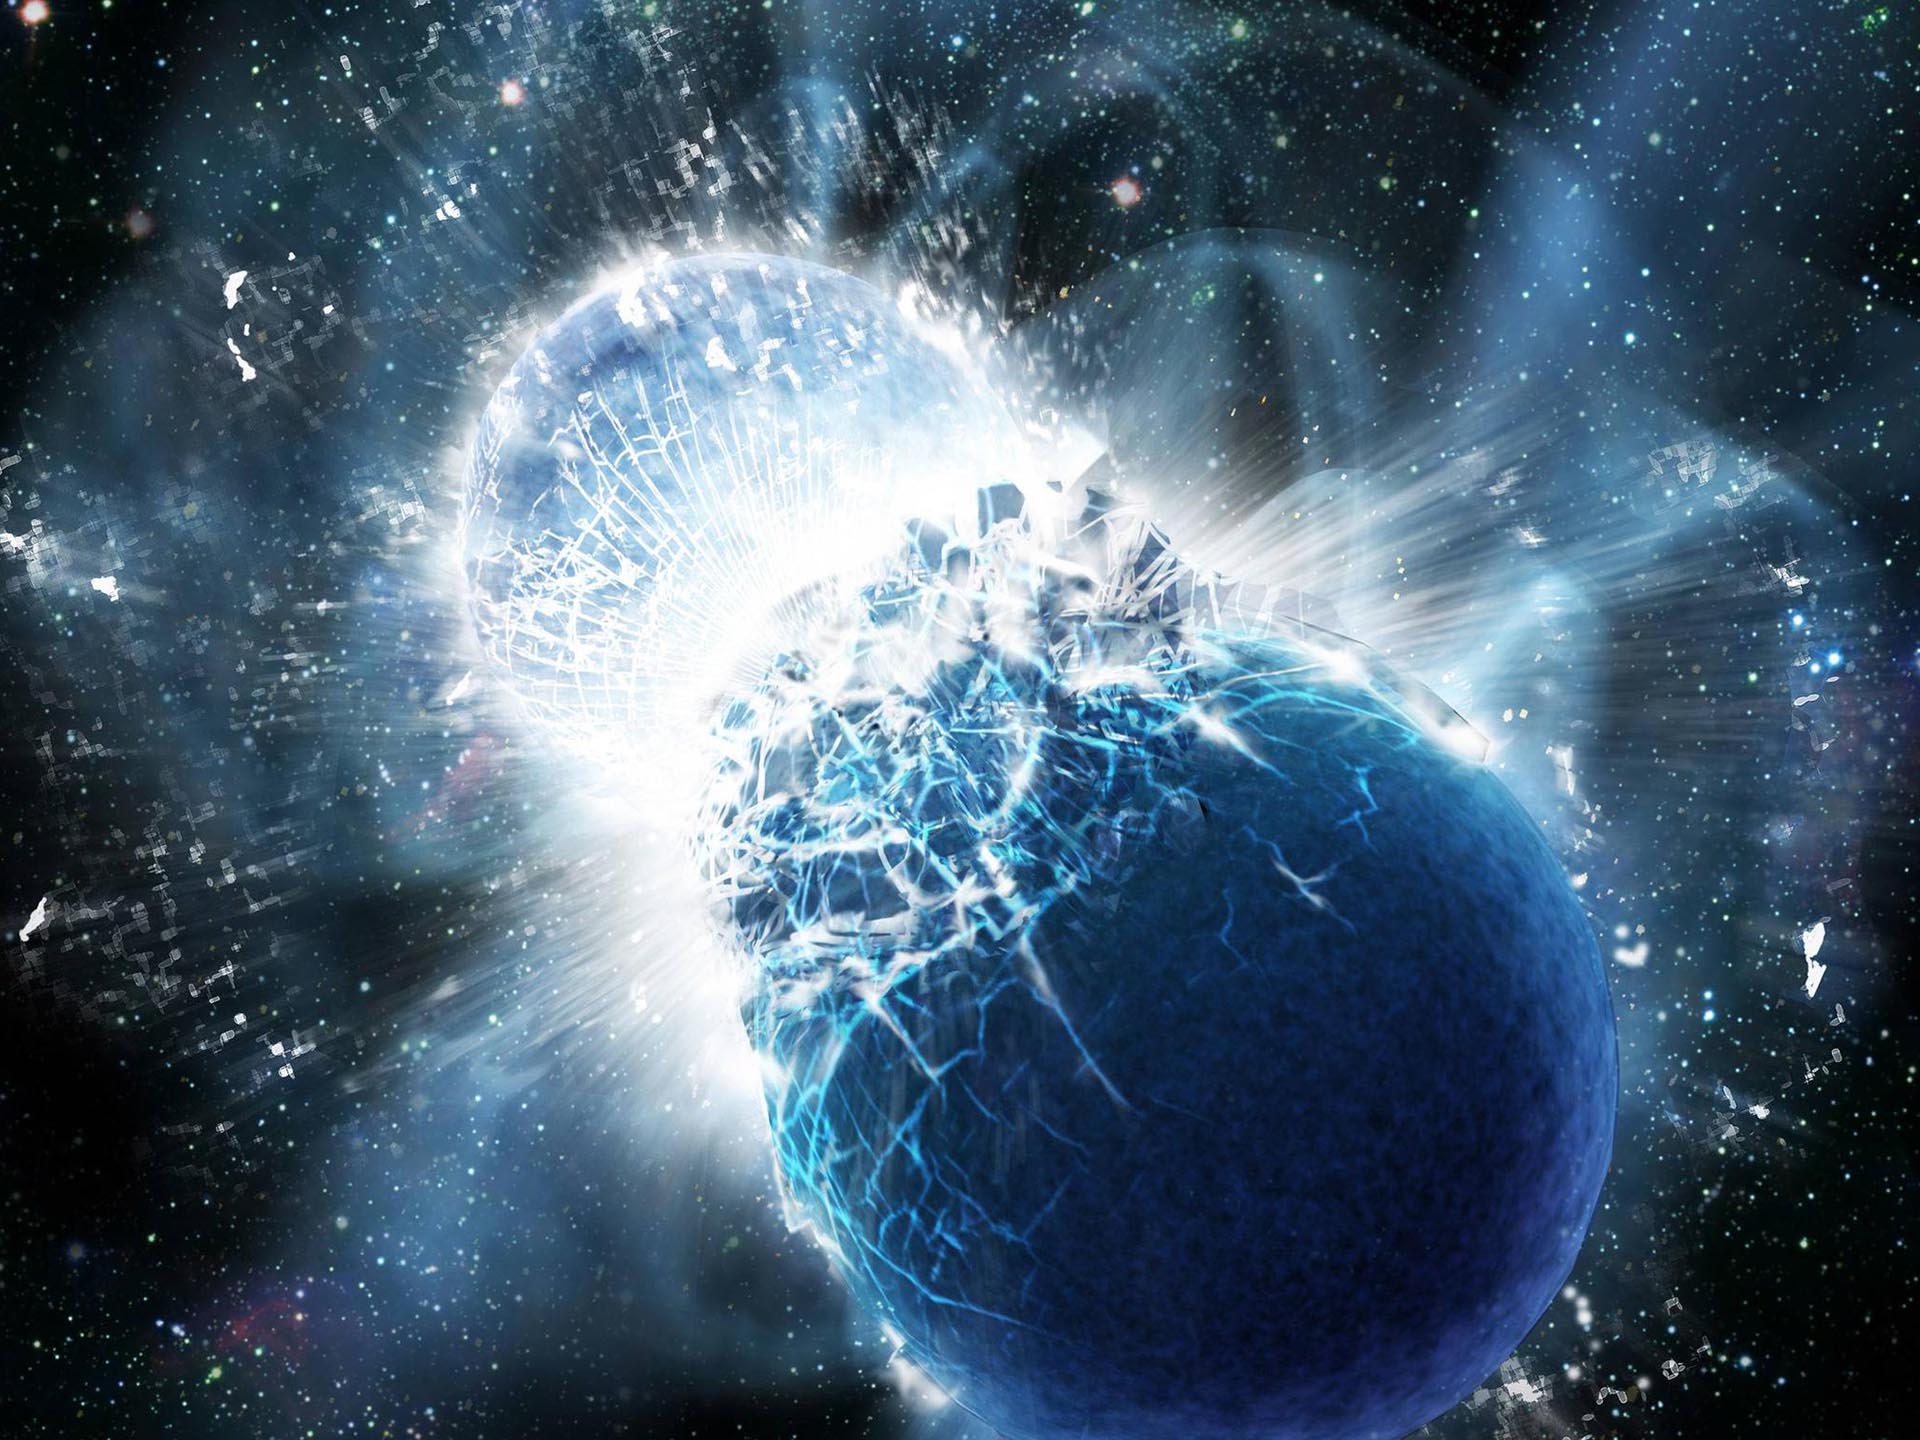 What If a Magnetar Entered Our Solar System?